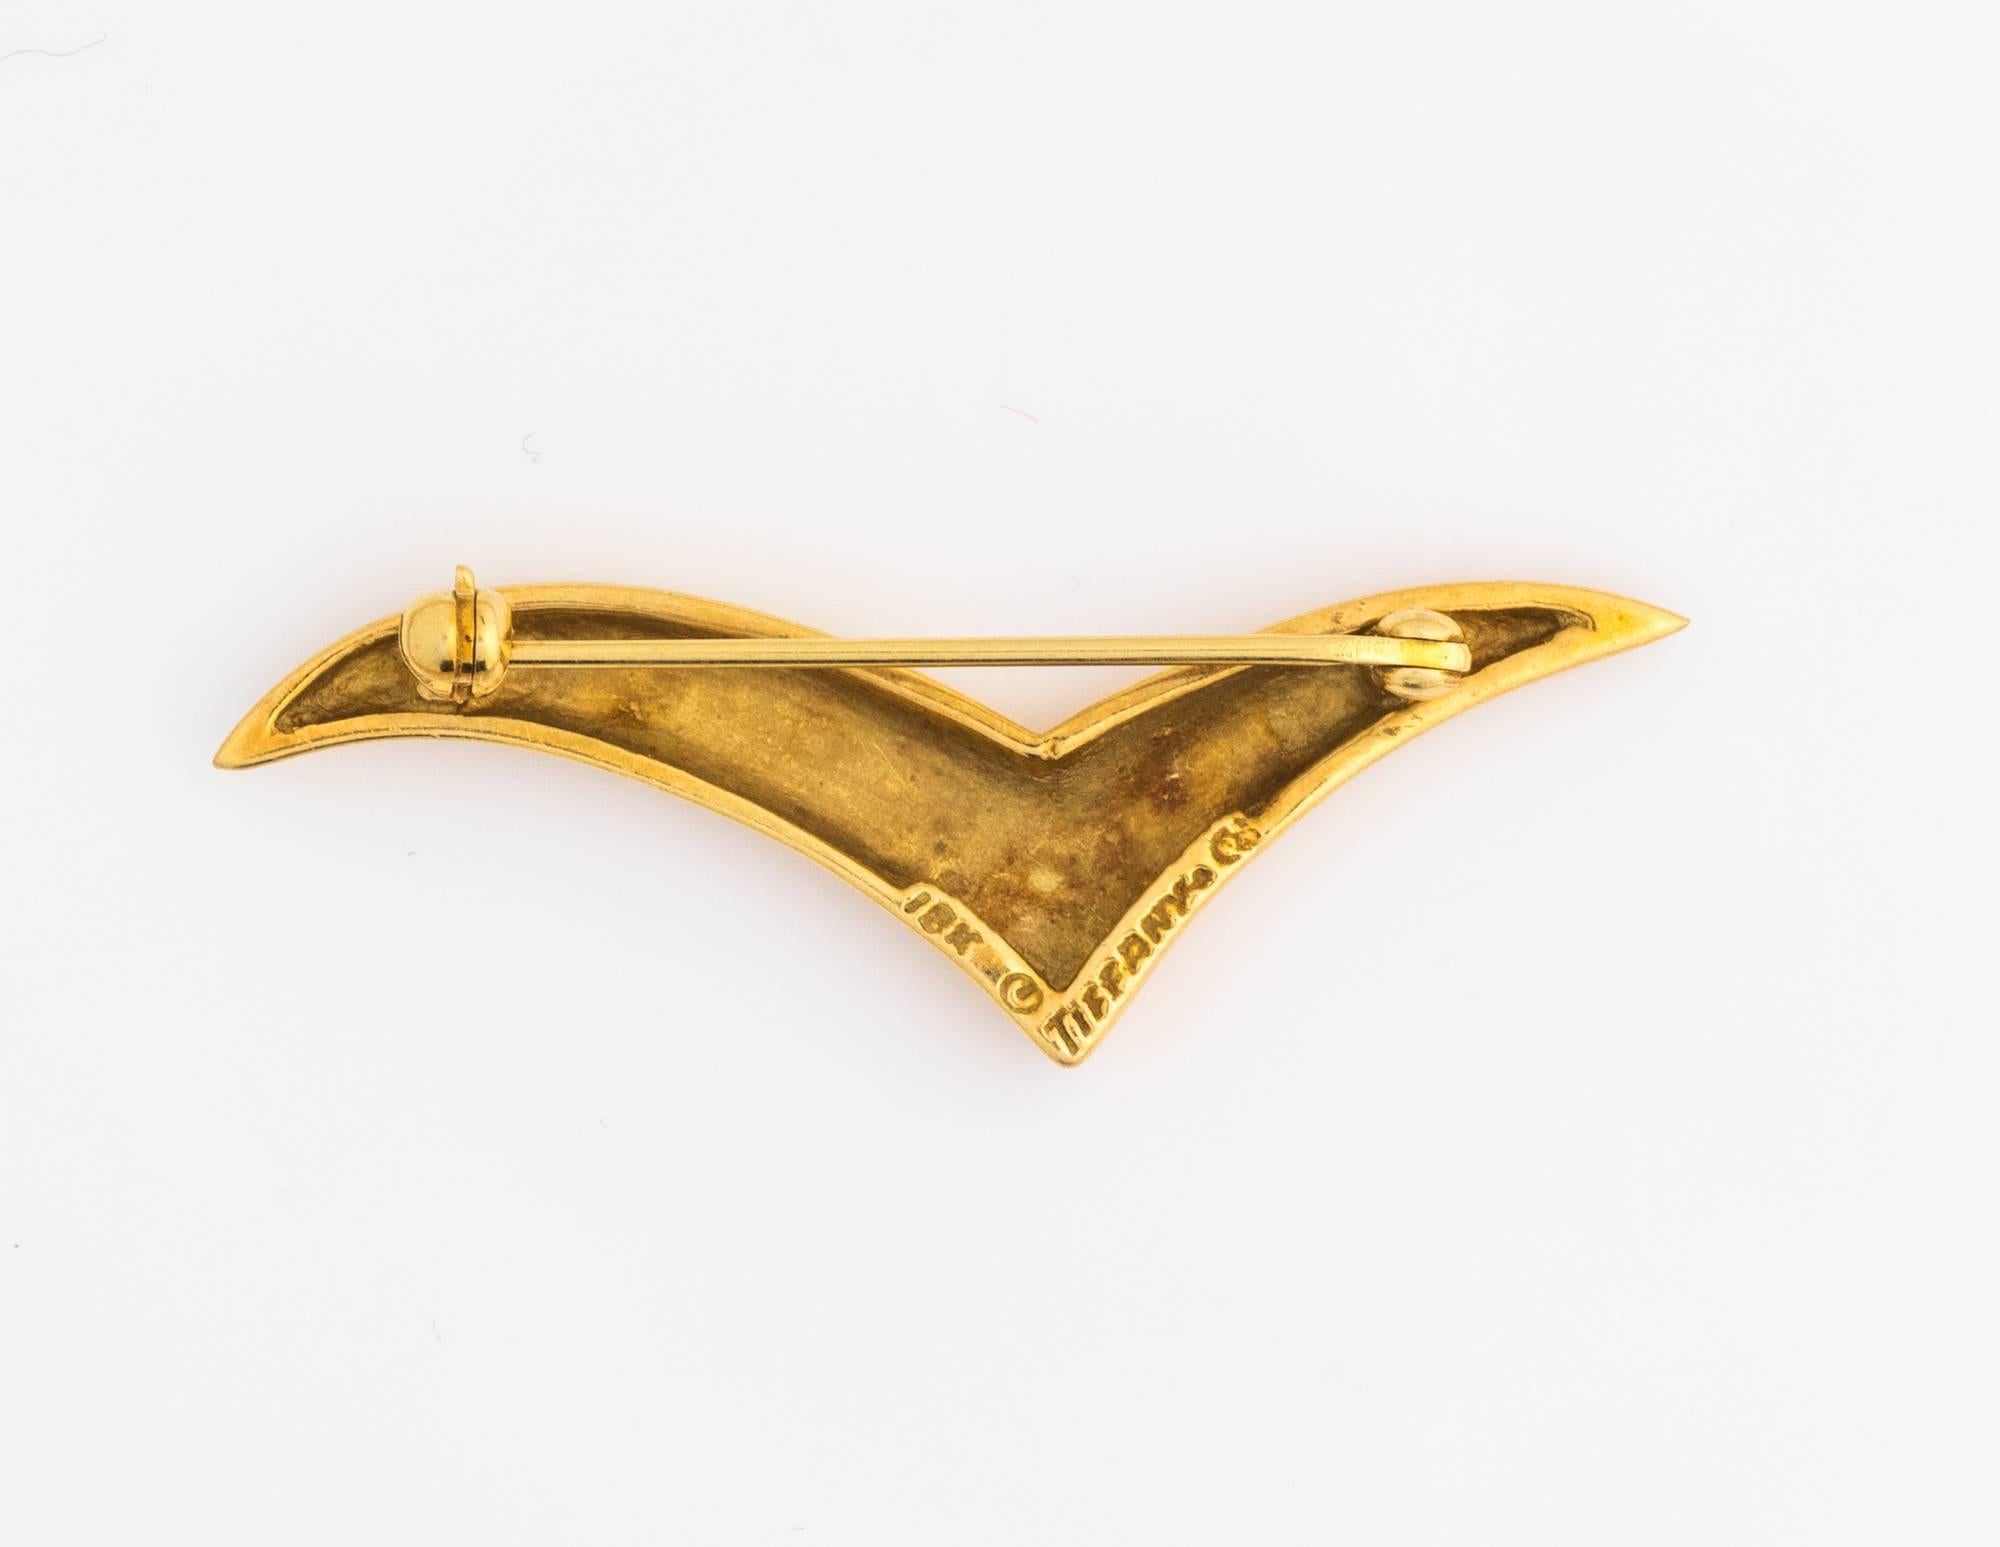 1980s Tiffany & Co. 18 Karat Yellow Gold Seagull Pin

Crafted from rich 18K Yellow Gold
Hallmarked Tiffany and Co.

Gorgeous accent perfect for lapel/scarf accent. 
This lovely pin has developed a rosy patina. We will provide a complimentary polish